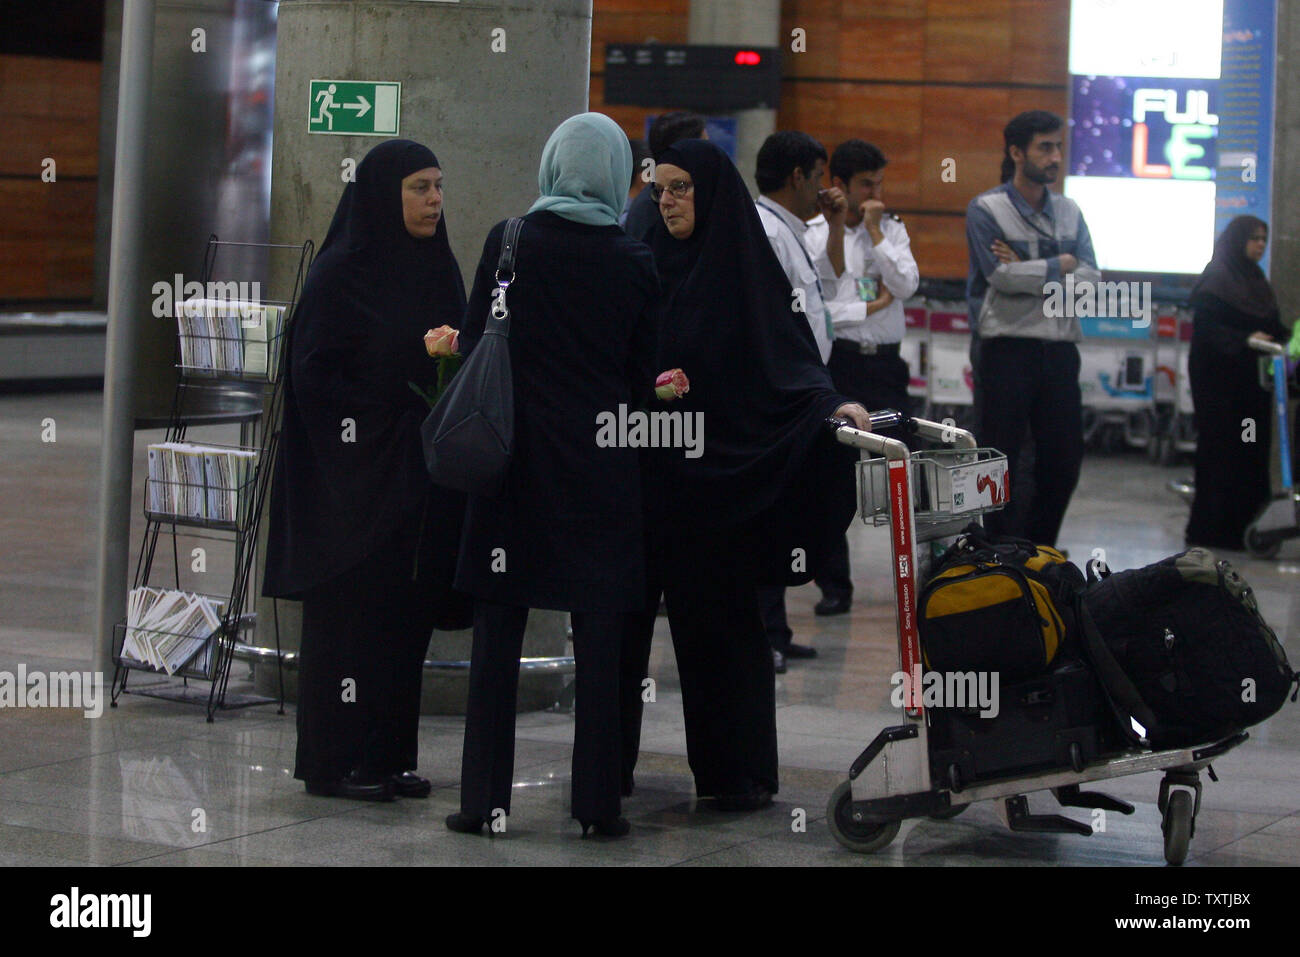 Cindy Hickey (L) and Nora Shroud (R) speak with Swiss Ambassador Livia Leu Agosti in Imam Khomeini Airport on May 19, 2010 after arriving to visit their imprisoned children. Shane Bauer, 27, Sarah Shourd, 31, and Josh Fattal, 27, were detained on July 31,2009 after straying across Iran's border while on a hiking trip in northern Iraq's Kurdistan region.       UPI/Maryam Rahmanian Stock Photo